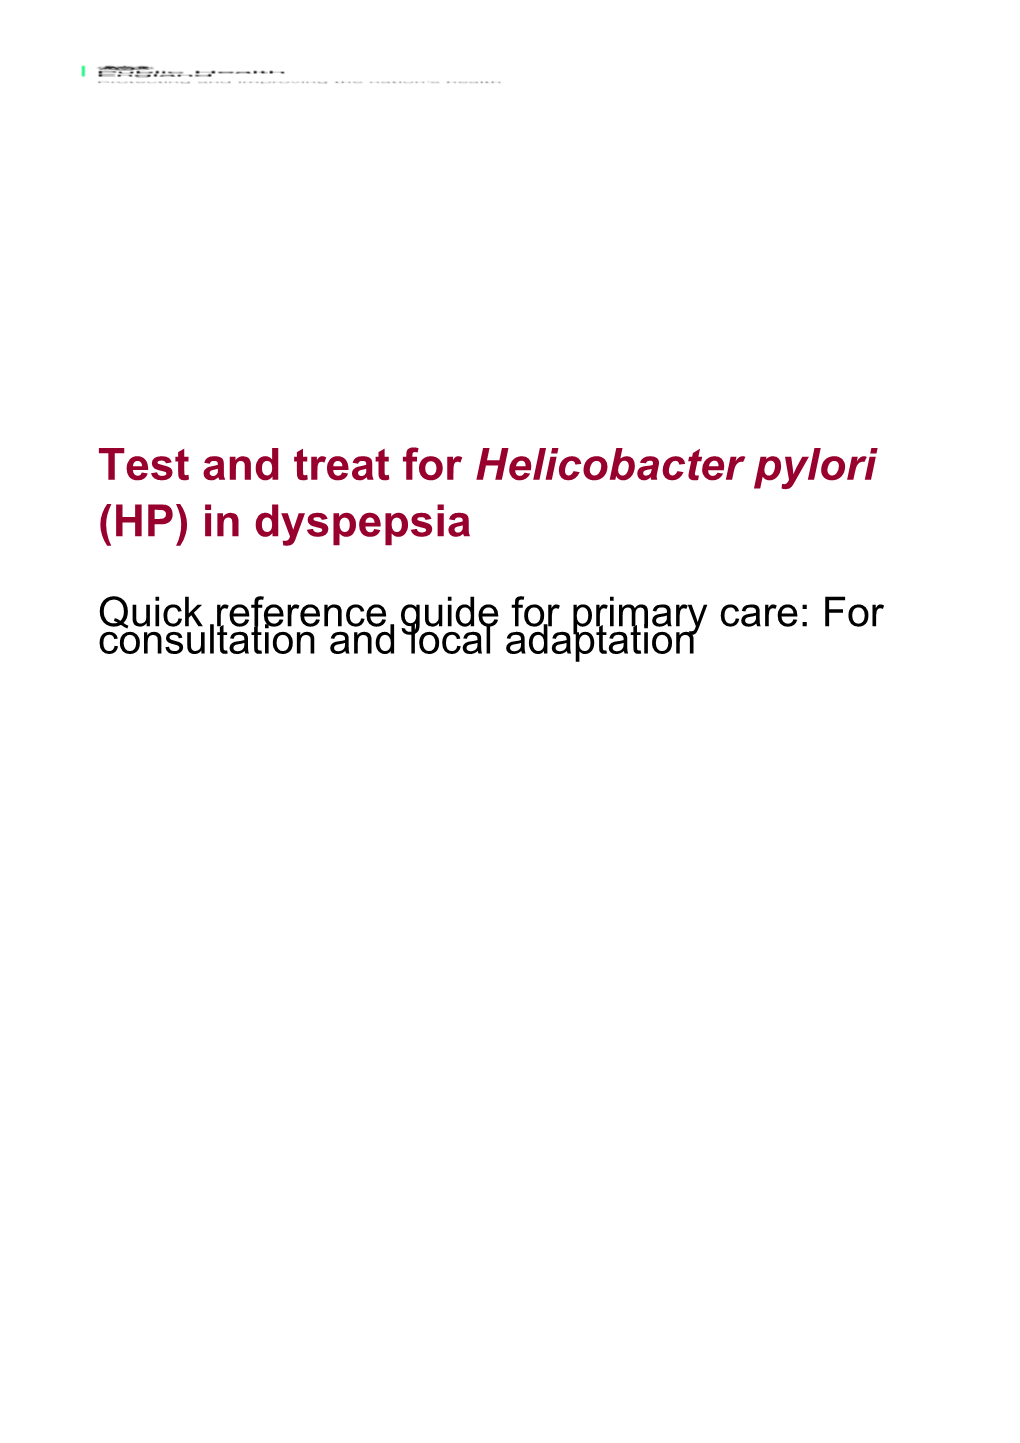 Test and Treat for Helicobacter Pylori(HP) in Dyspepsia